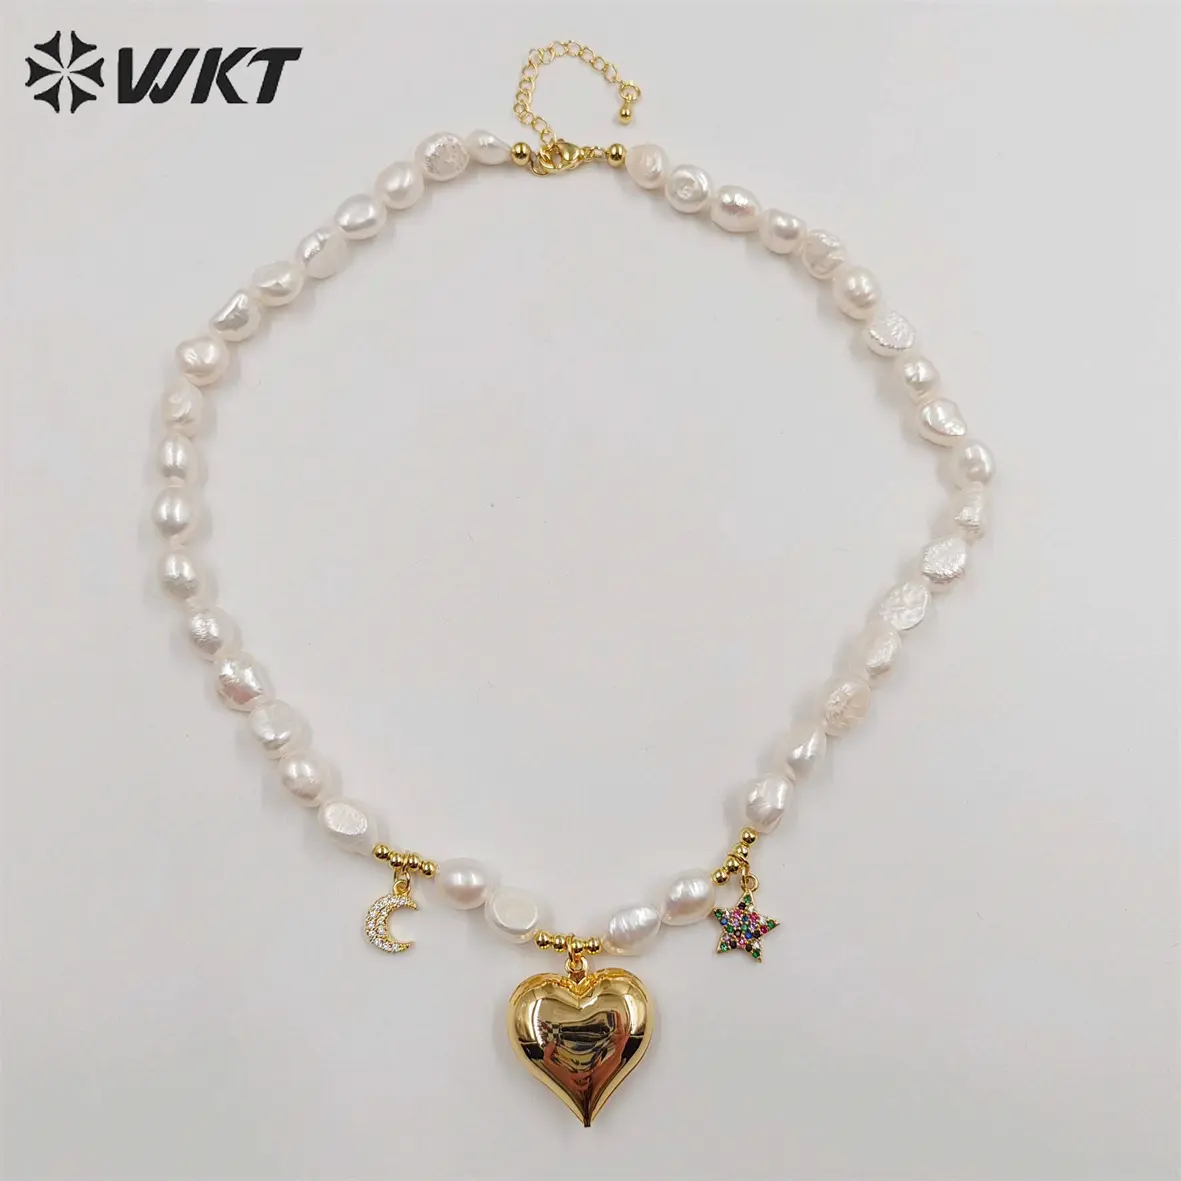 WT-JN231 Wholesale fashion gold hand Strand Freshwater Pearl beads Necklace 16 inch long choker lovely Bear heart necklace